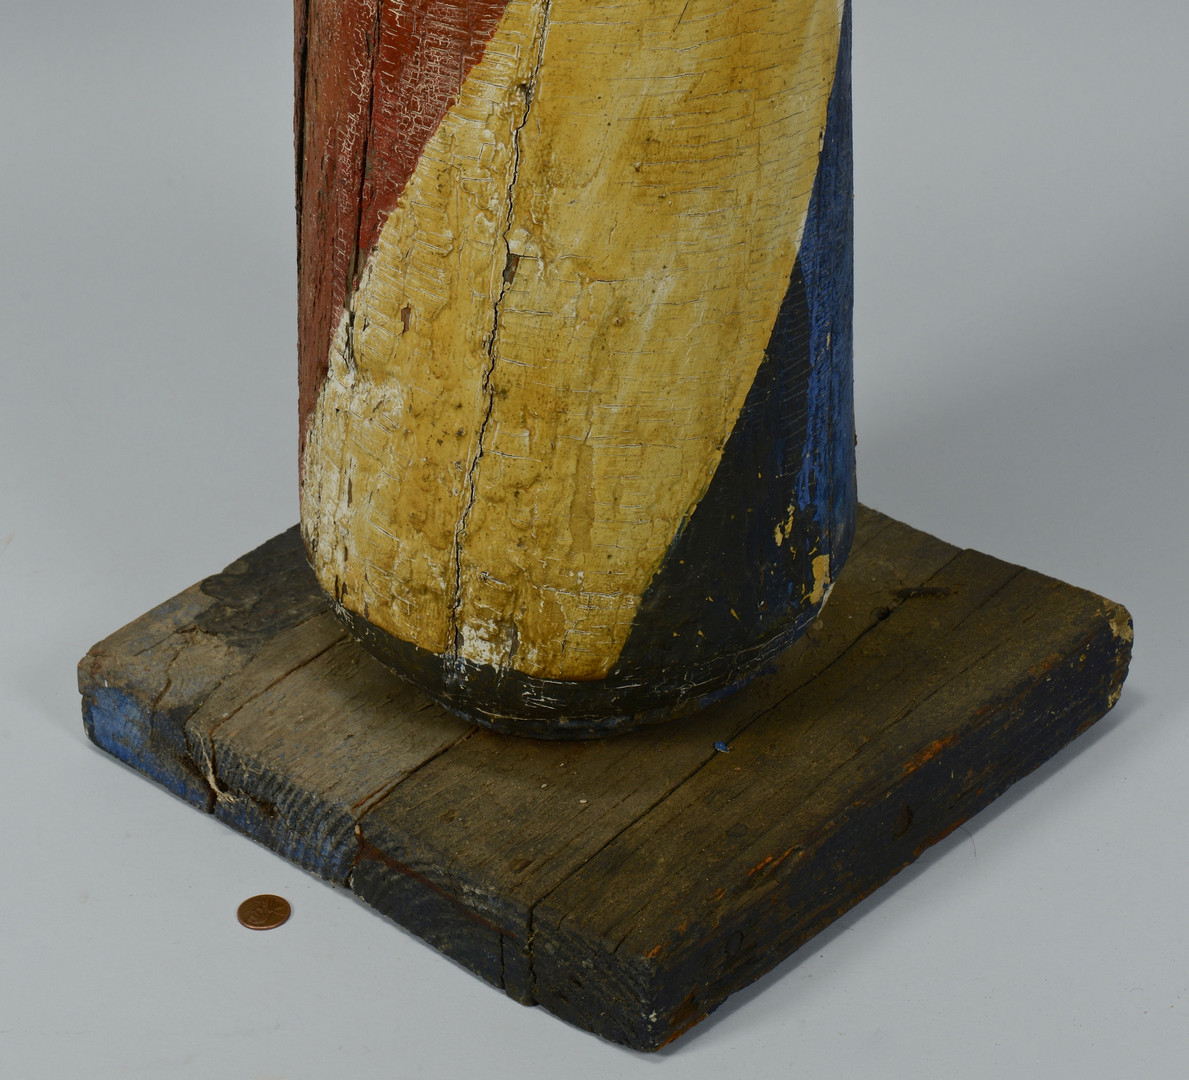 Lot 120: Early Painted Wooden Barber Pole